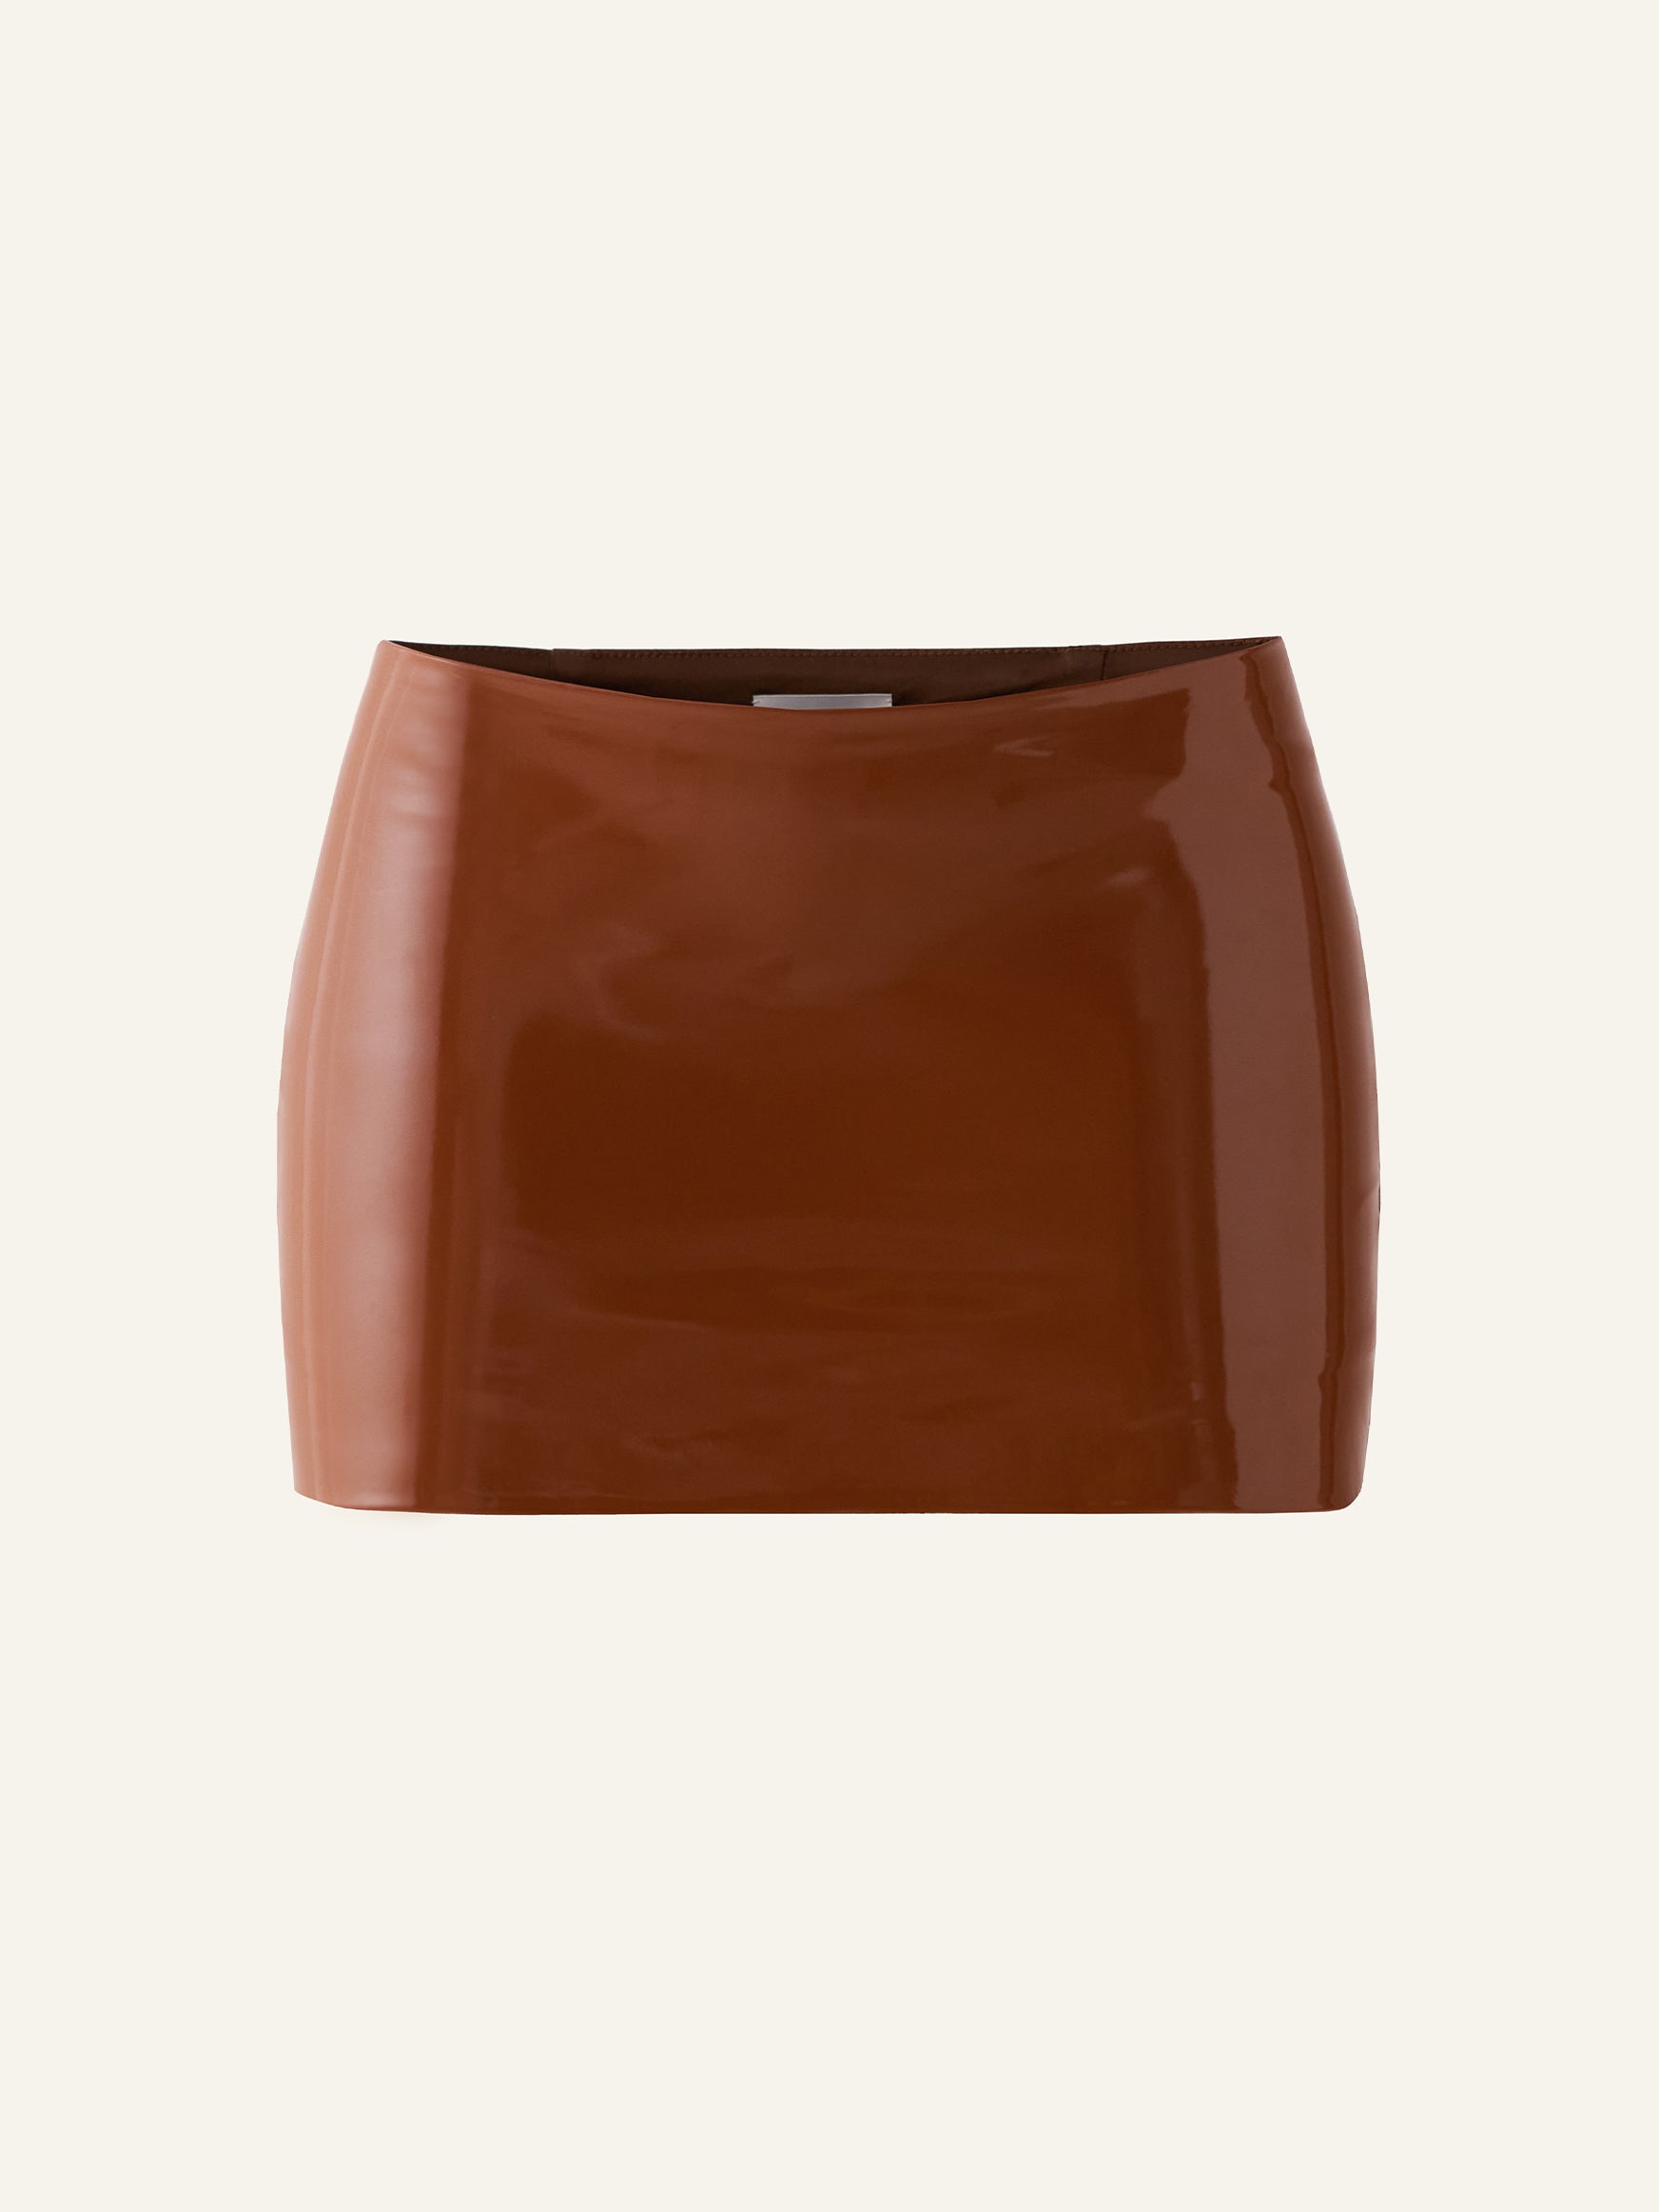 Product photo of a brown vegan leather low rise mini skort